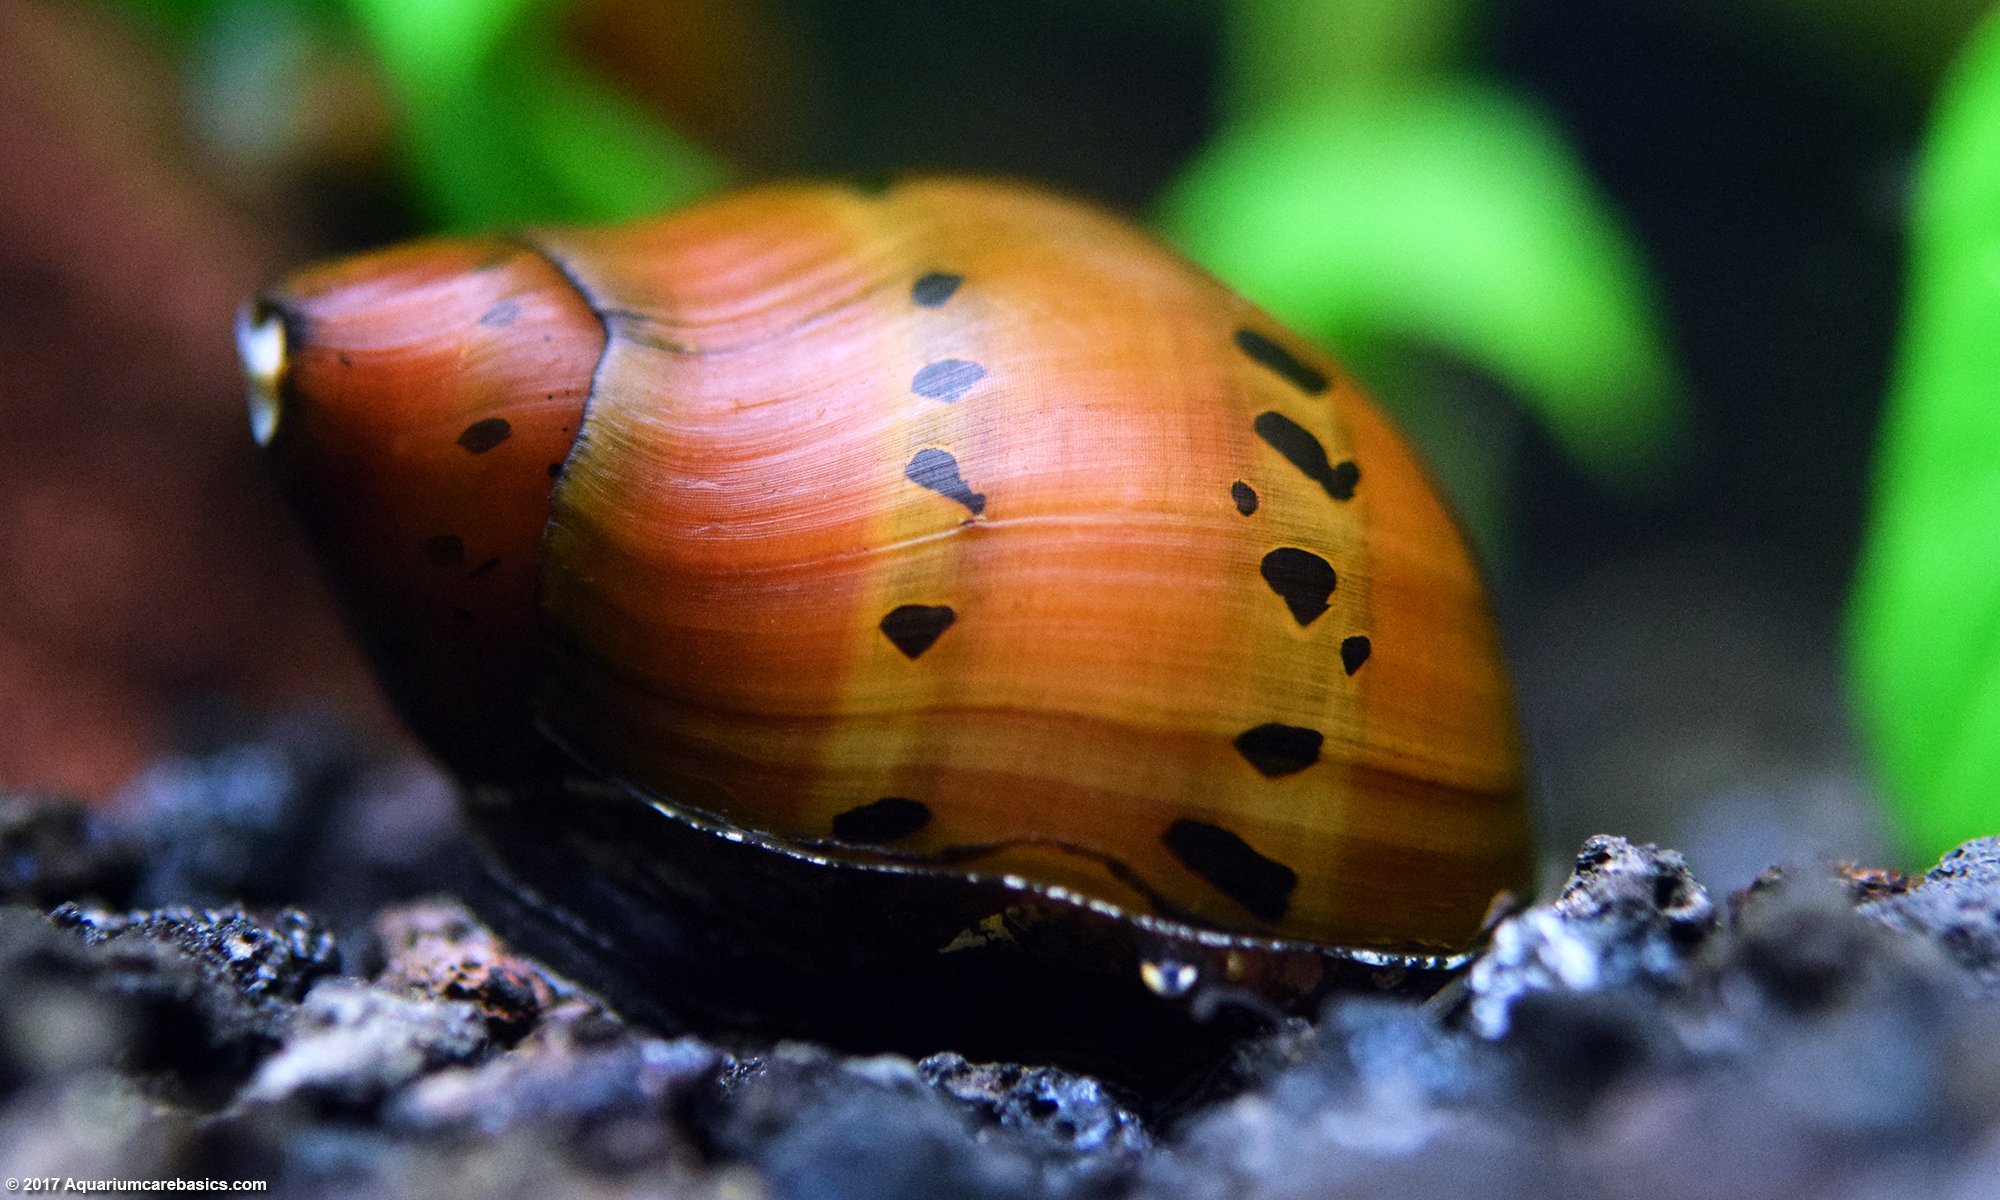 What is the best water temperature for Nerite snails?